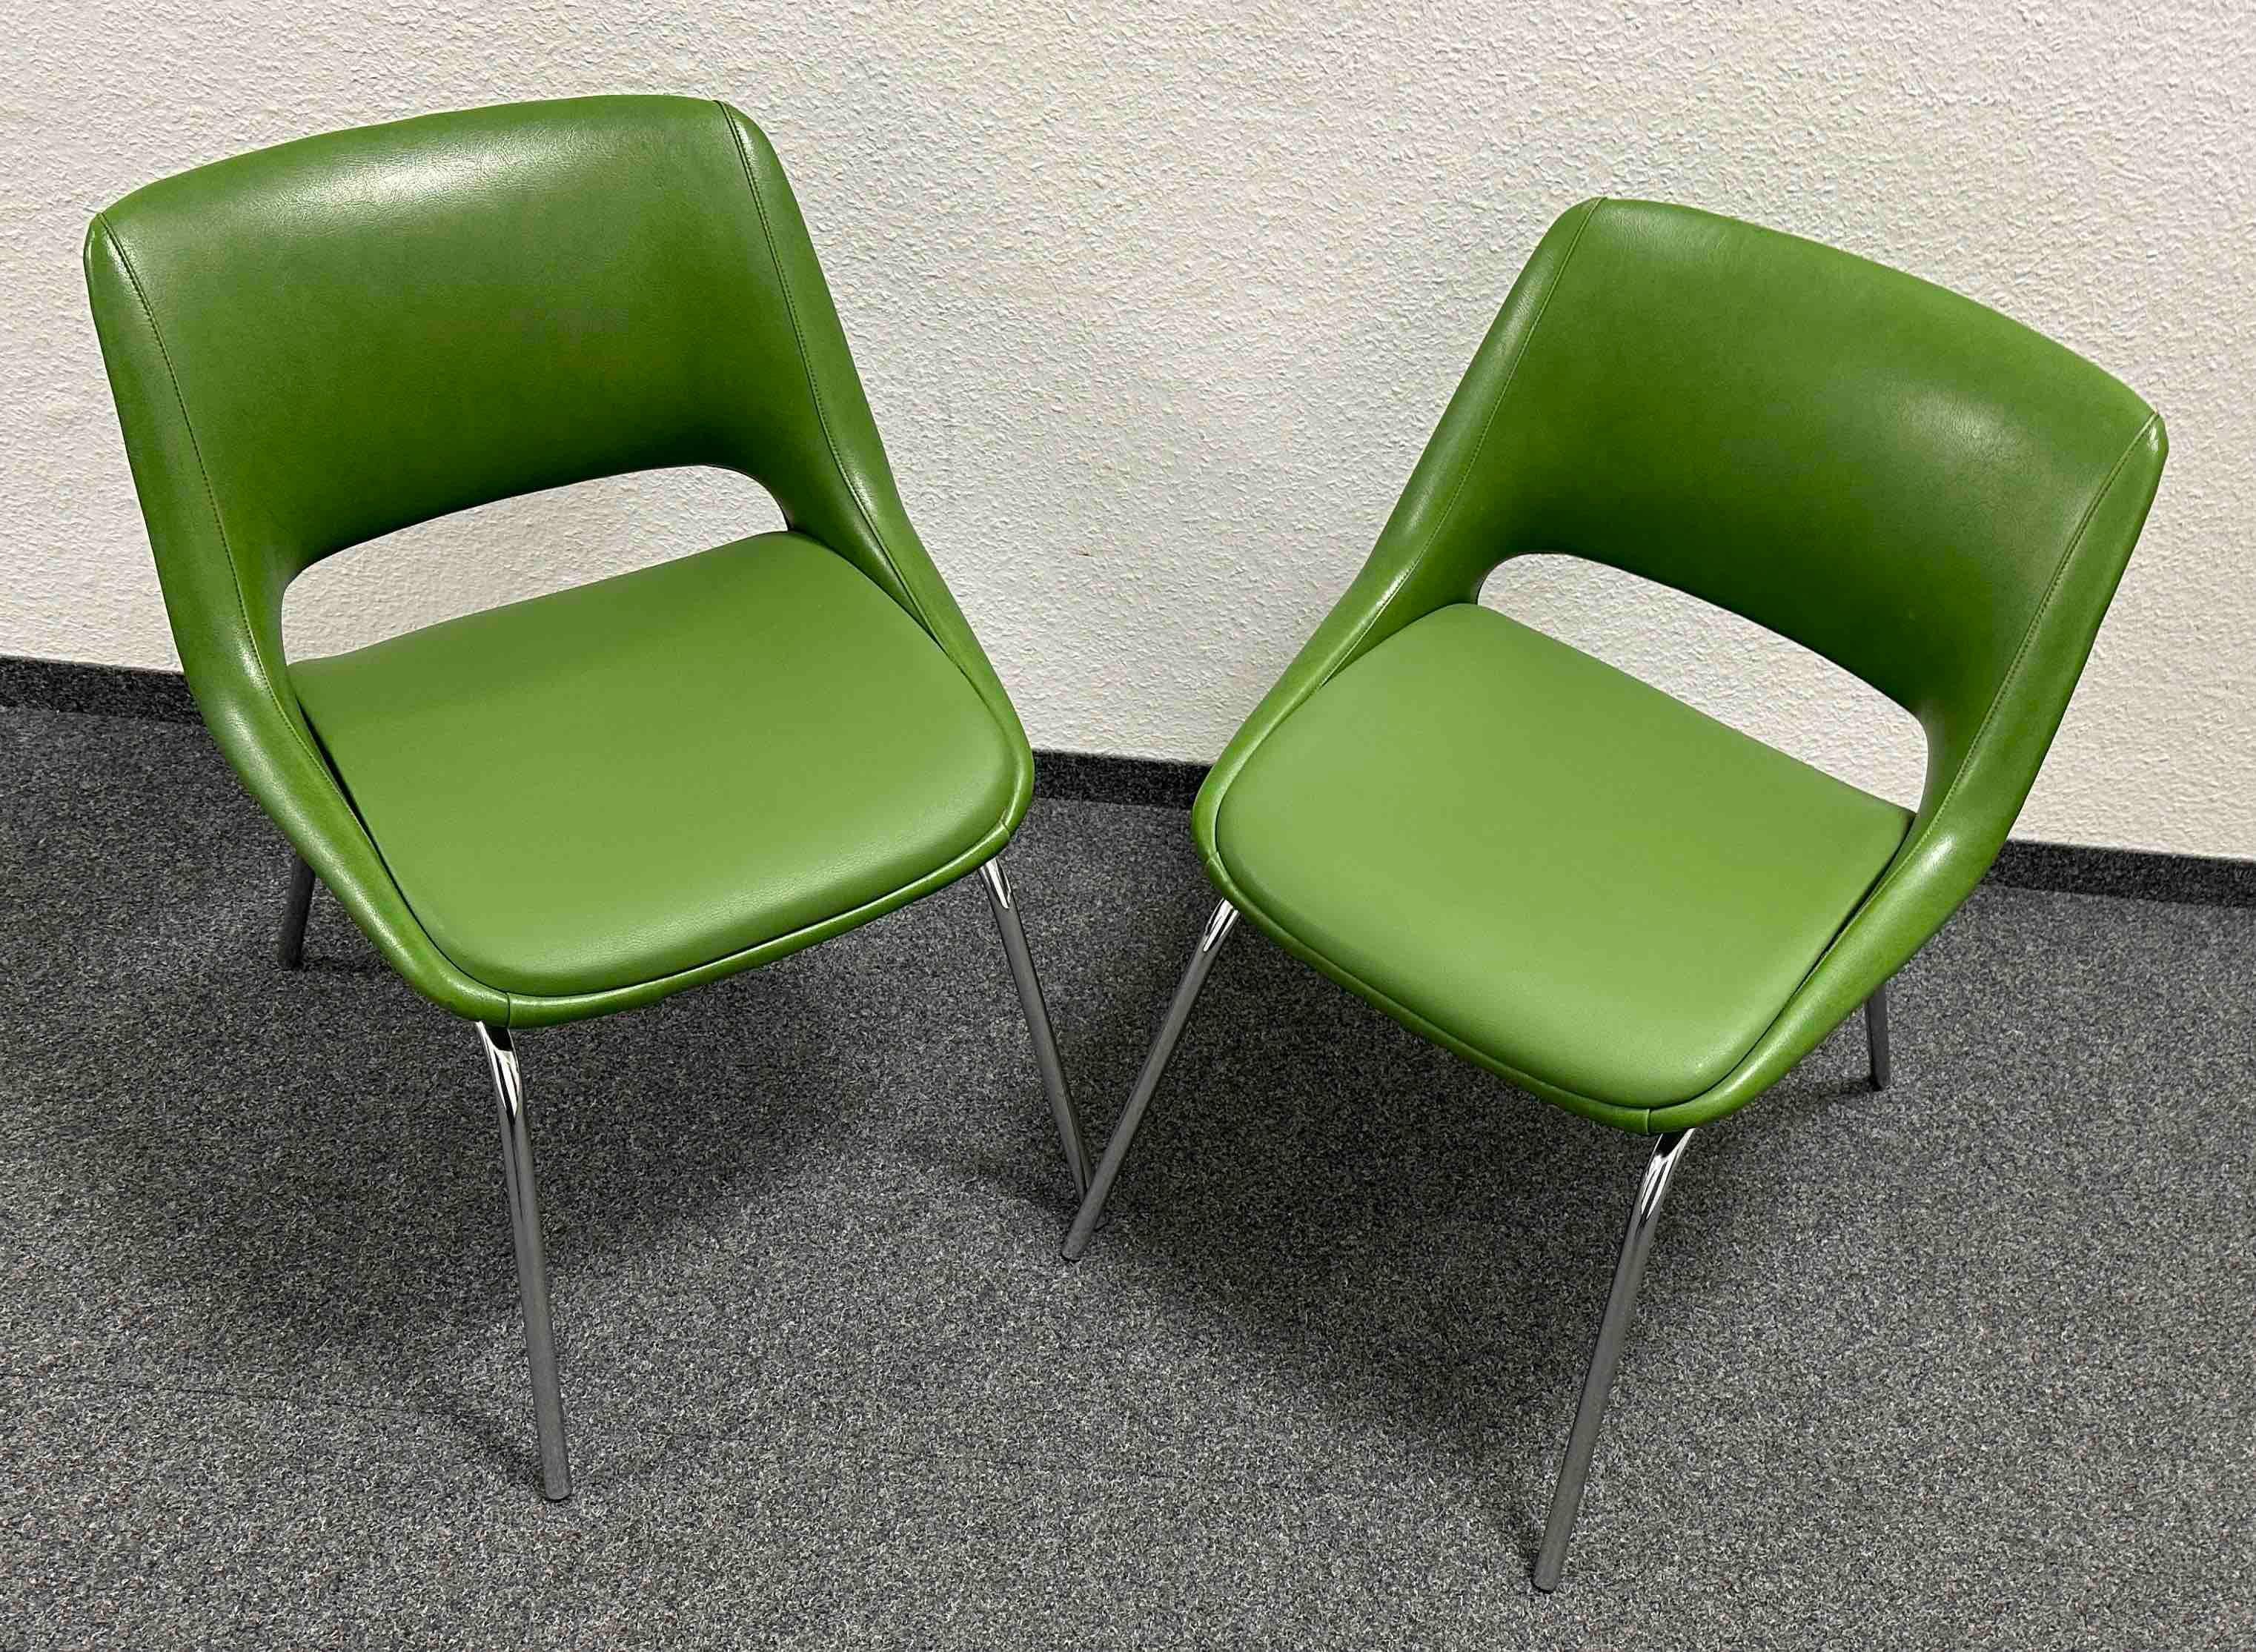 Two Chrome Base, Green Faux Leather Chairs Made by Blaha, Austria, 1970s For Sale 11